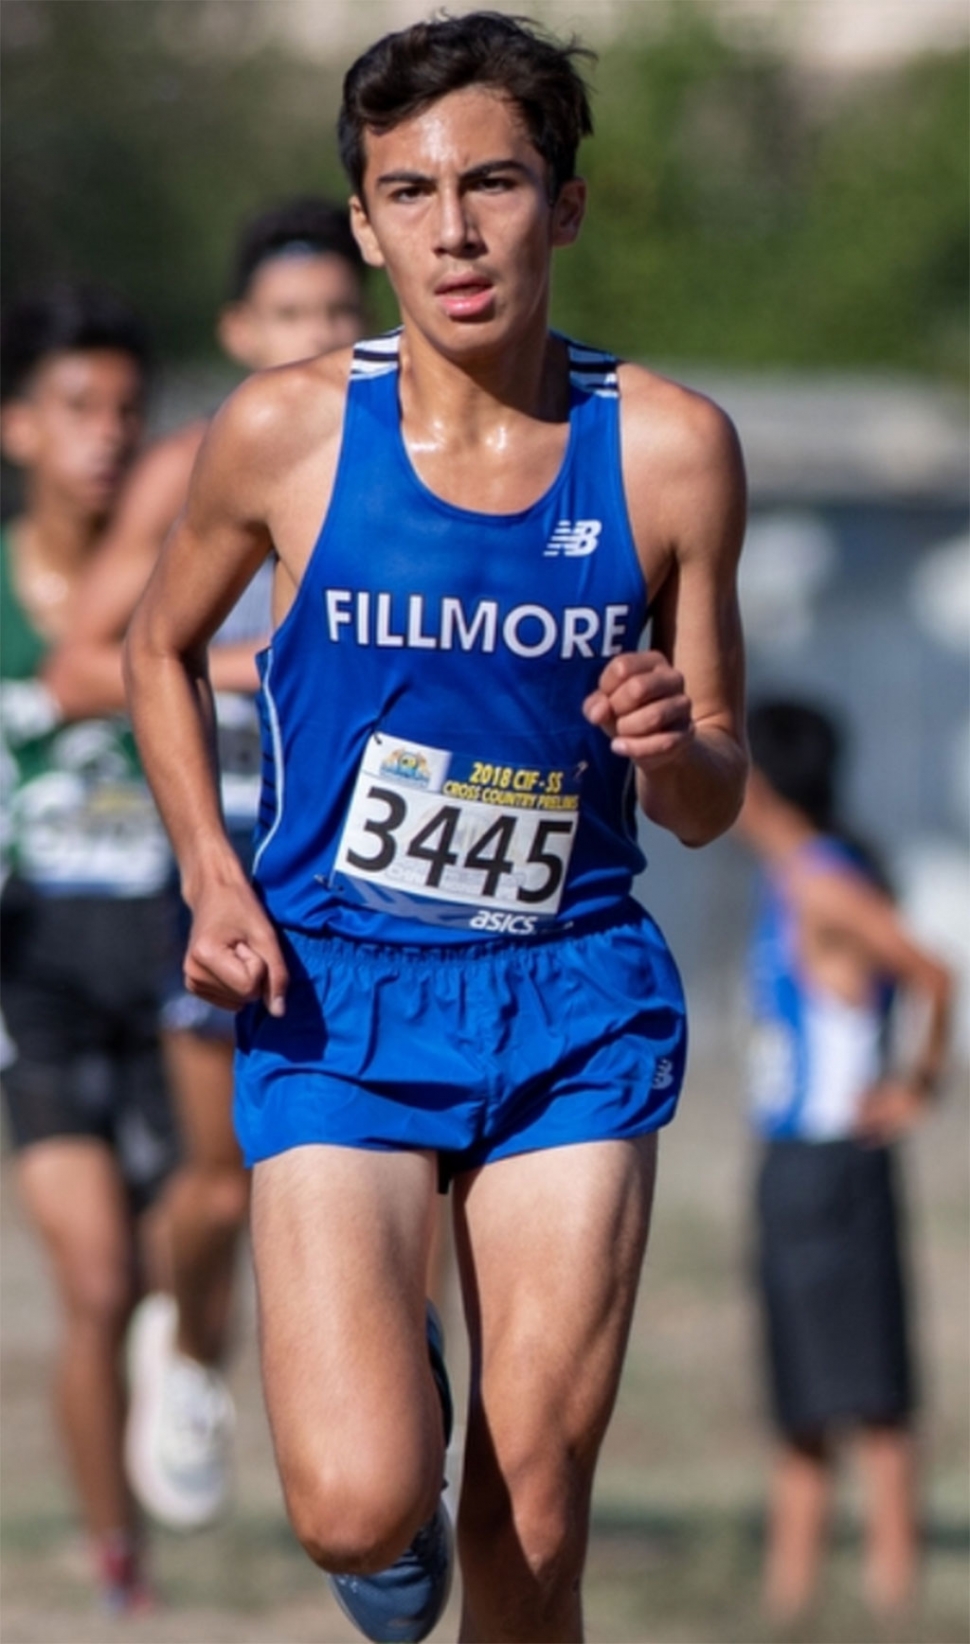 Sophomore Fabian Del Villar finished 9th with a personal best time of 15:49.6 and leads the Flashes at the Division IV CIF
Prelims. Photos courtesy Coach Kim Tafoya.